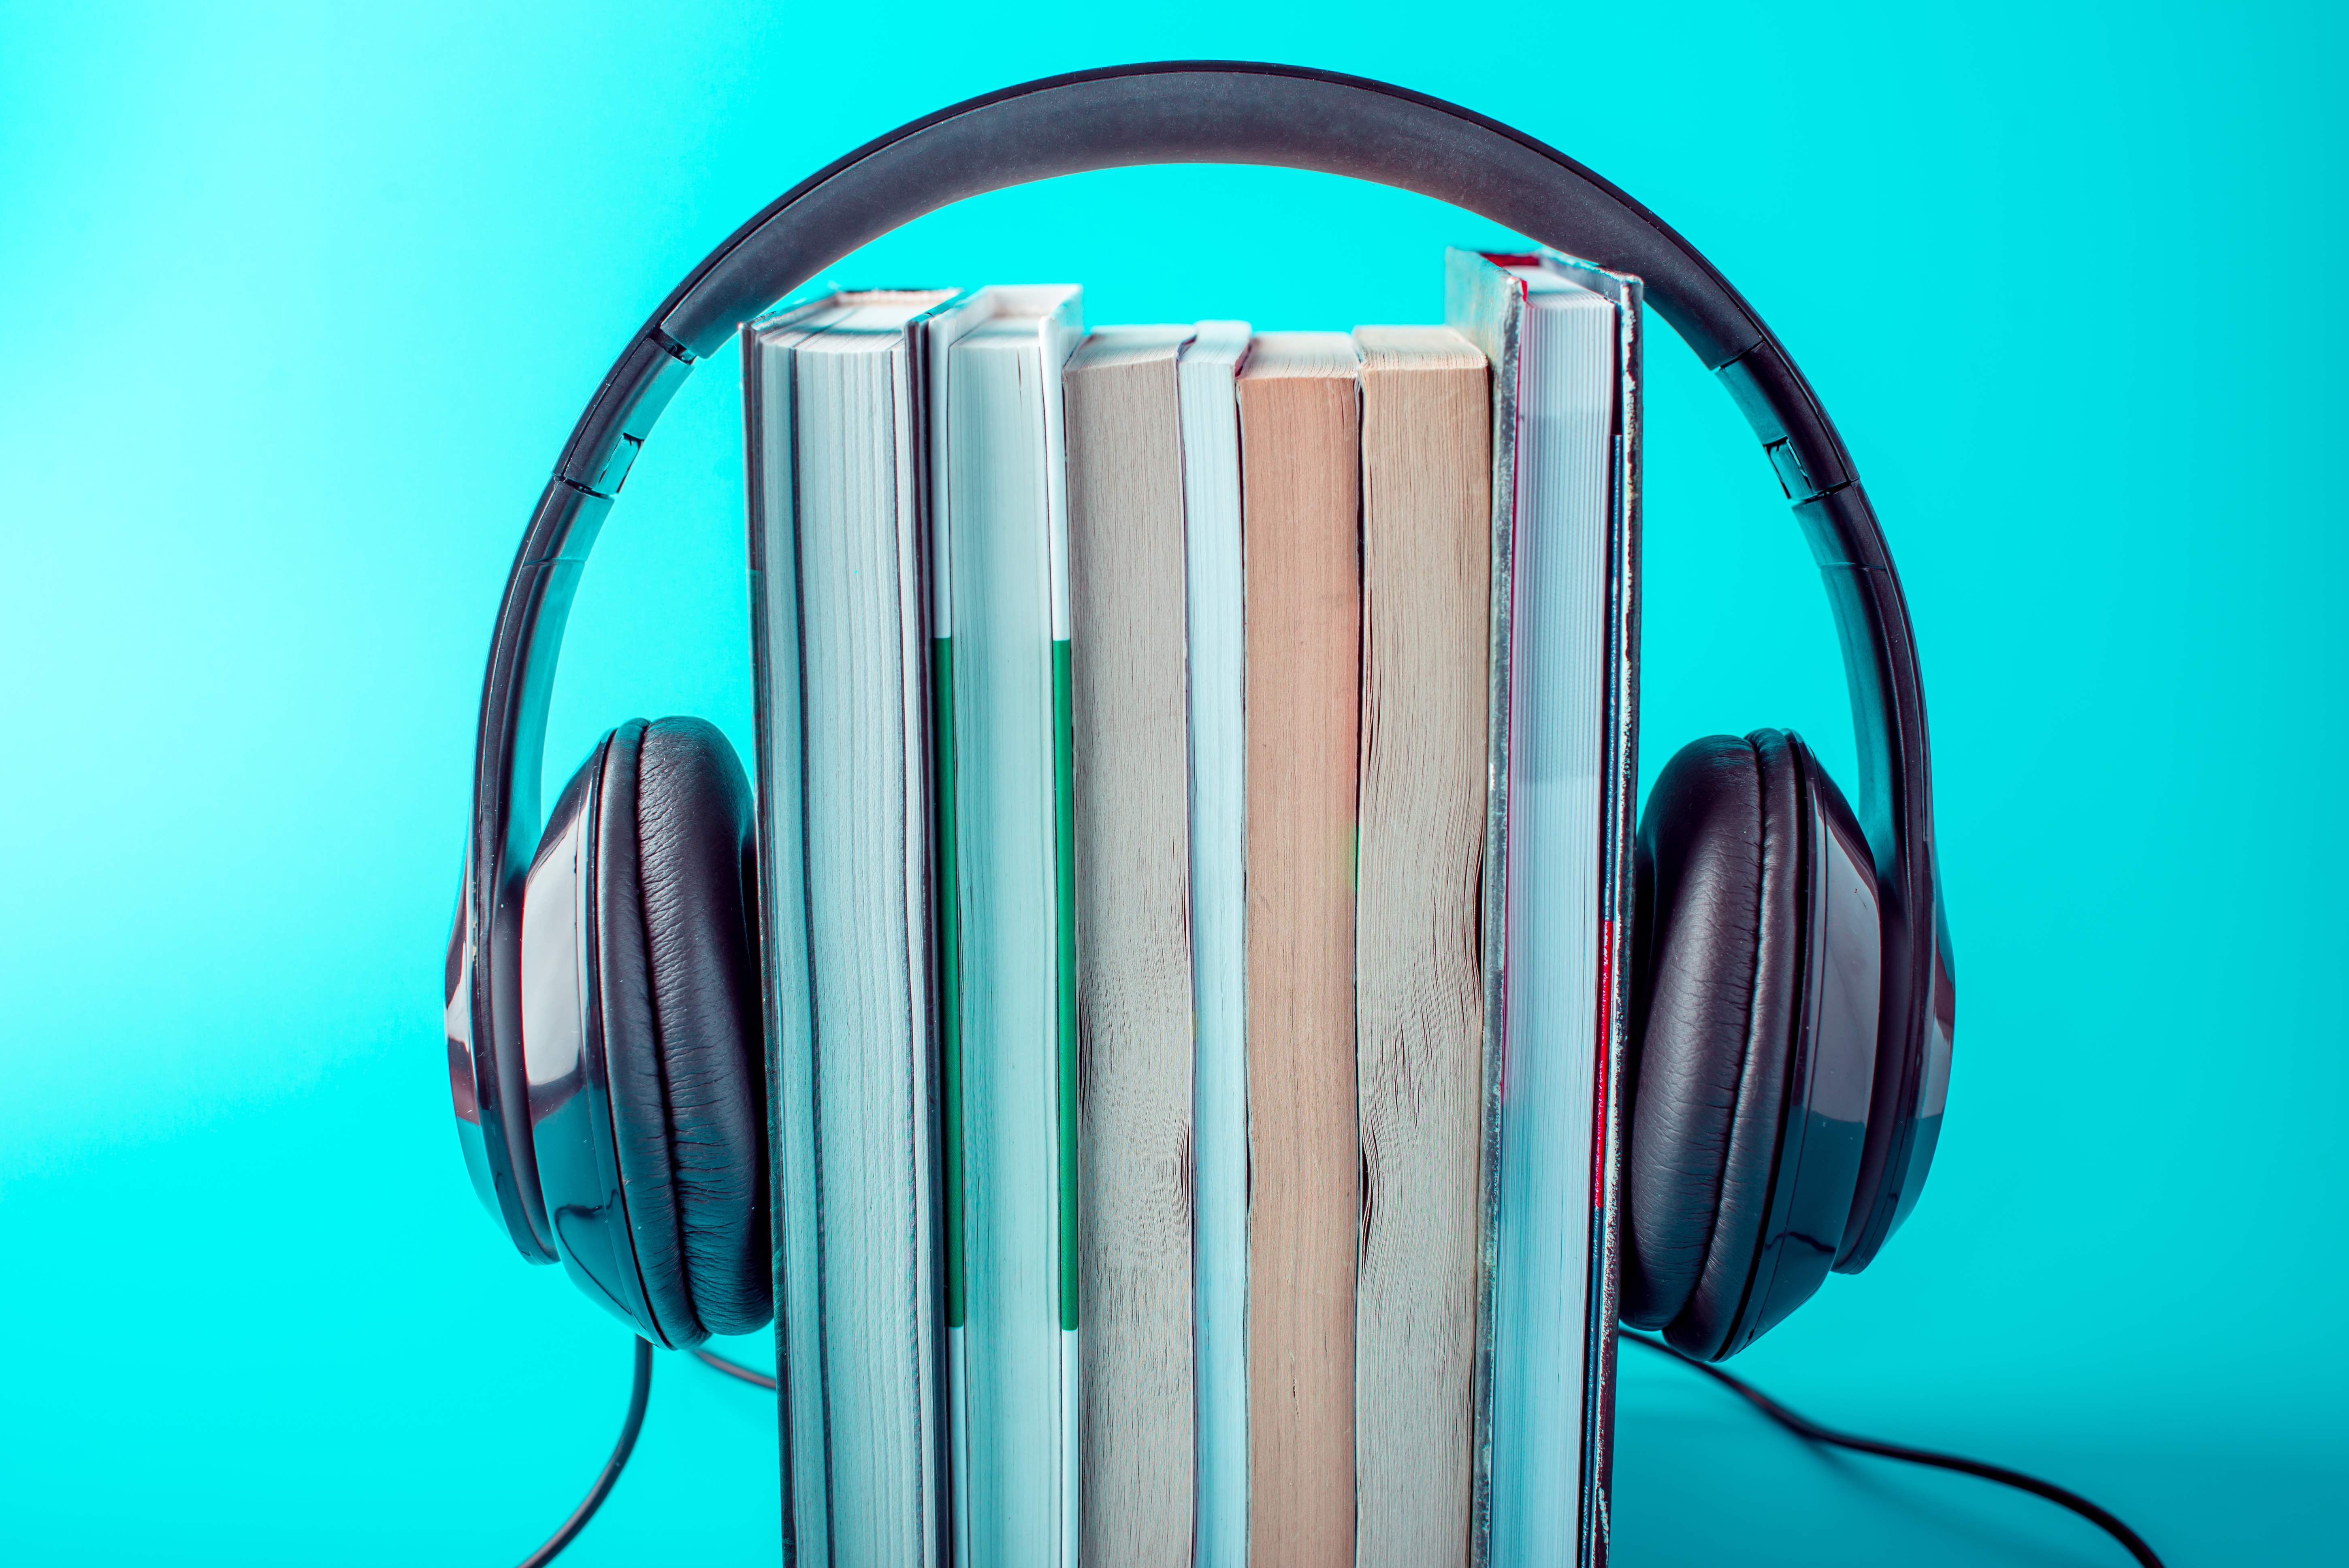 Why audiobooks are better?